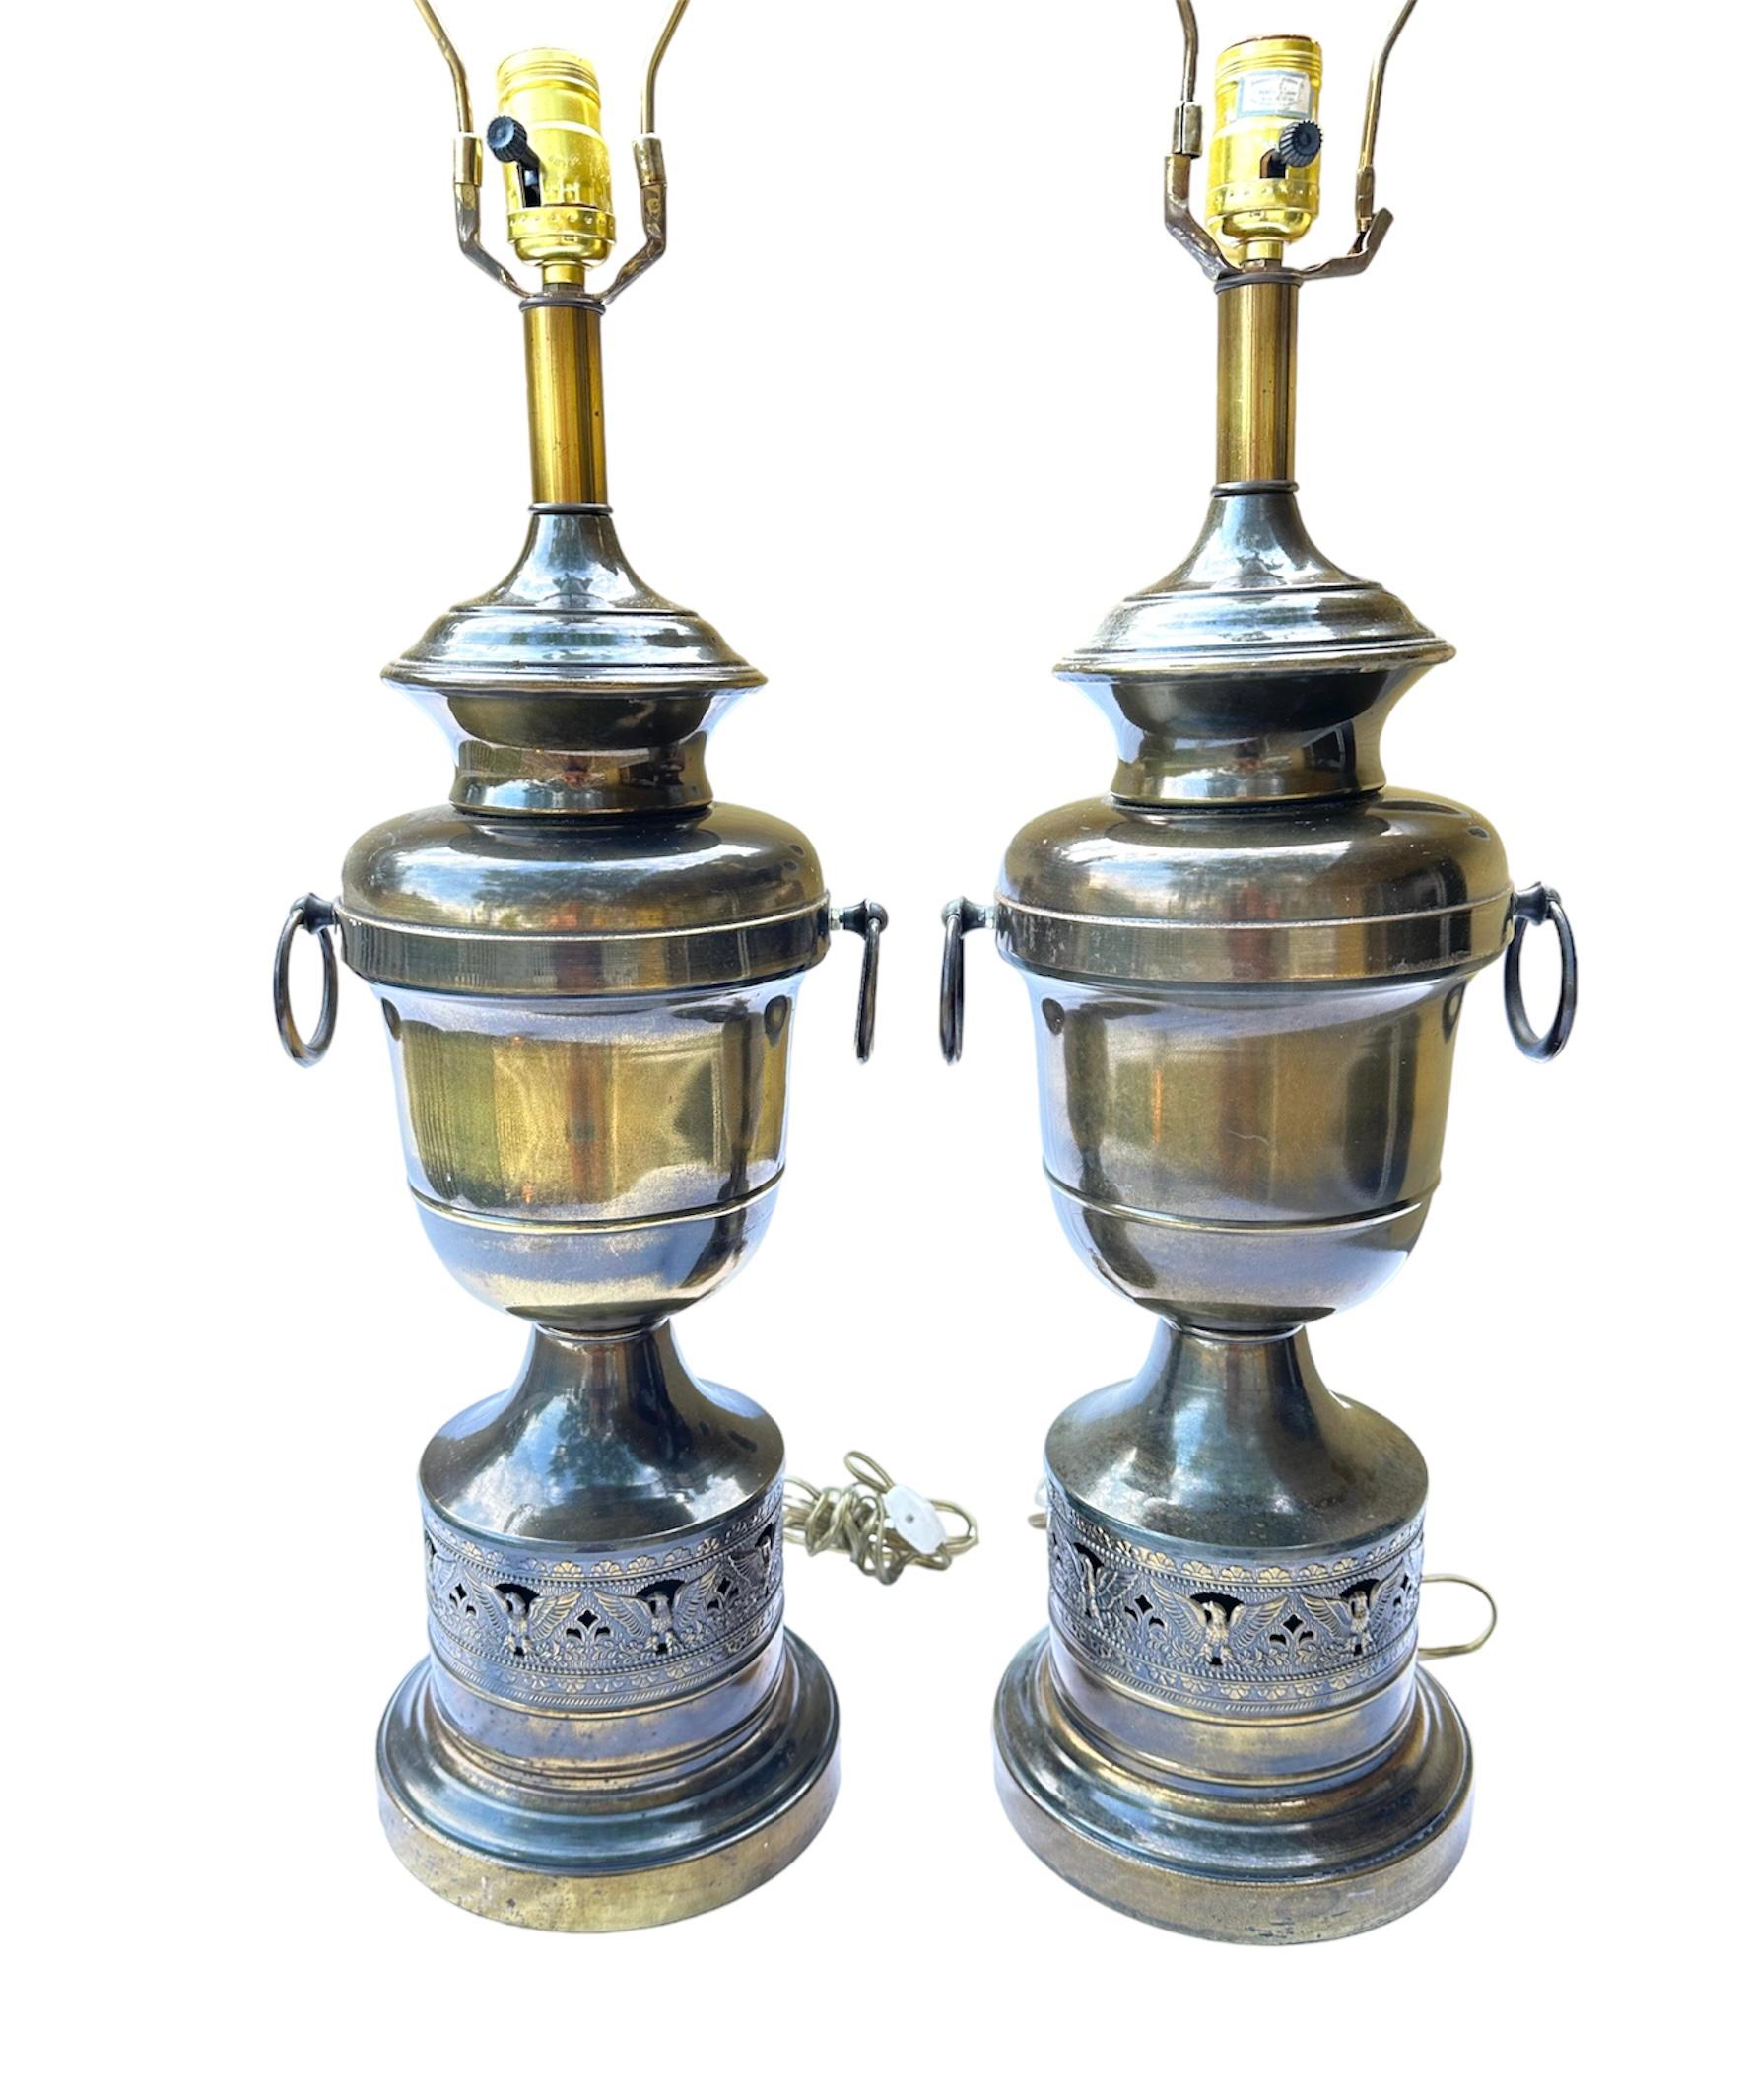 Brass Plated Table Lamps with the American Eagle 1